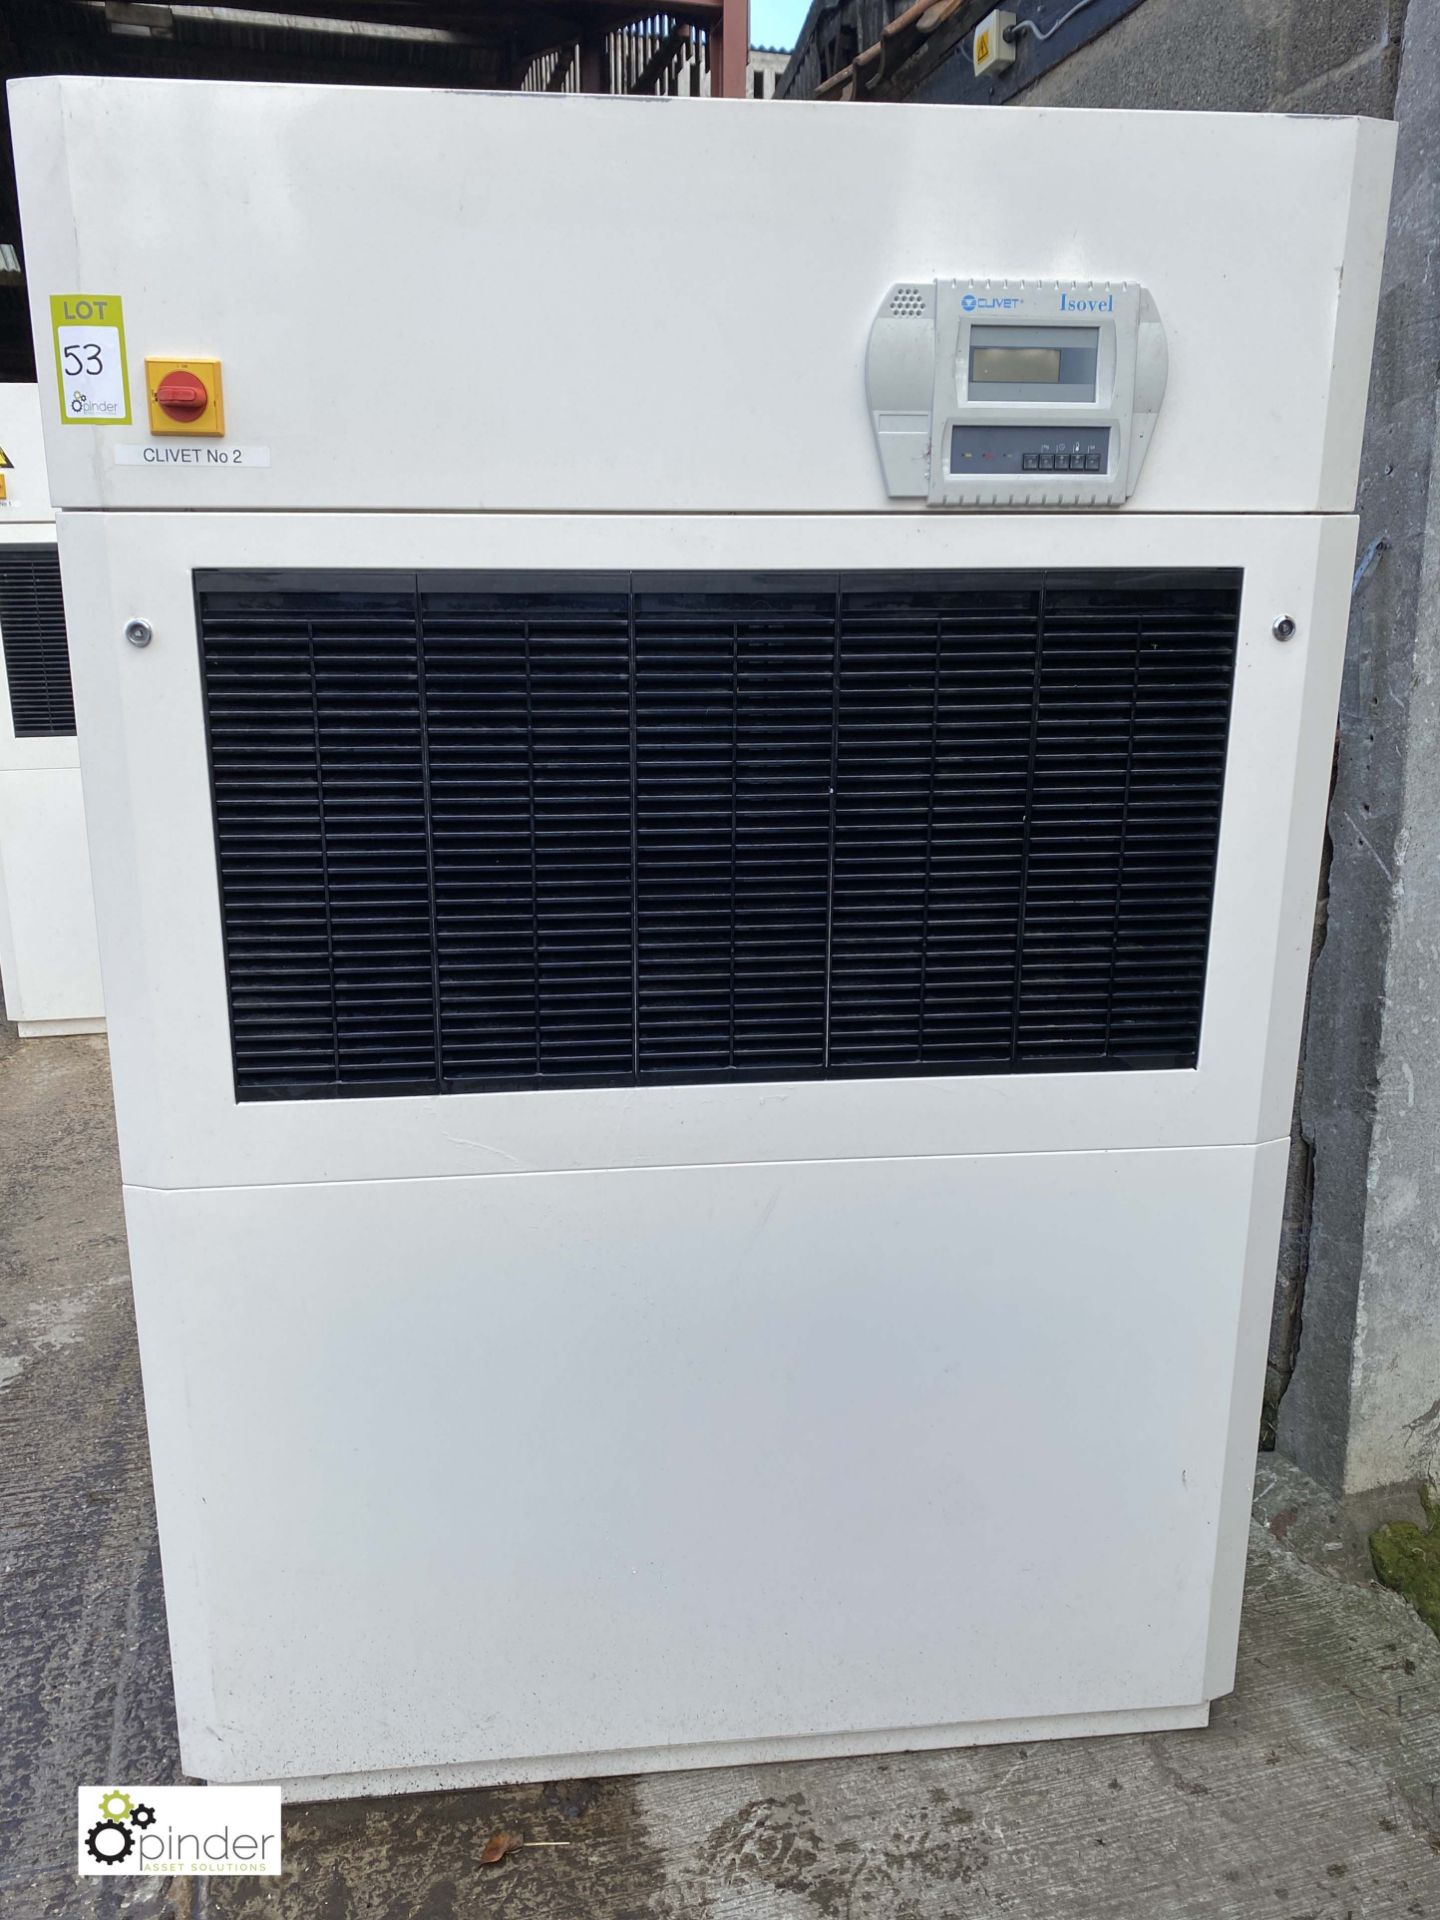 Clivet UCP-DX61 Air Conditioning Unit, year 2017 (LOCATION: Croxton) / (please note this lot has a